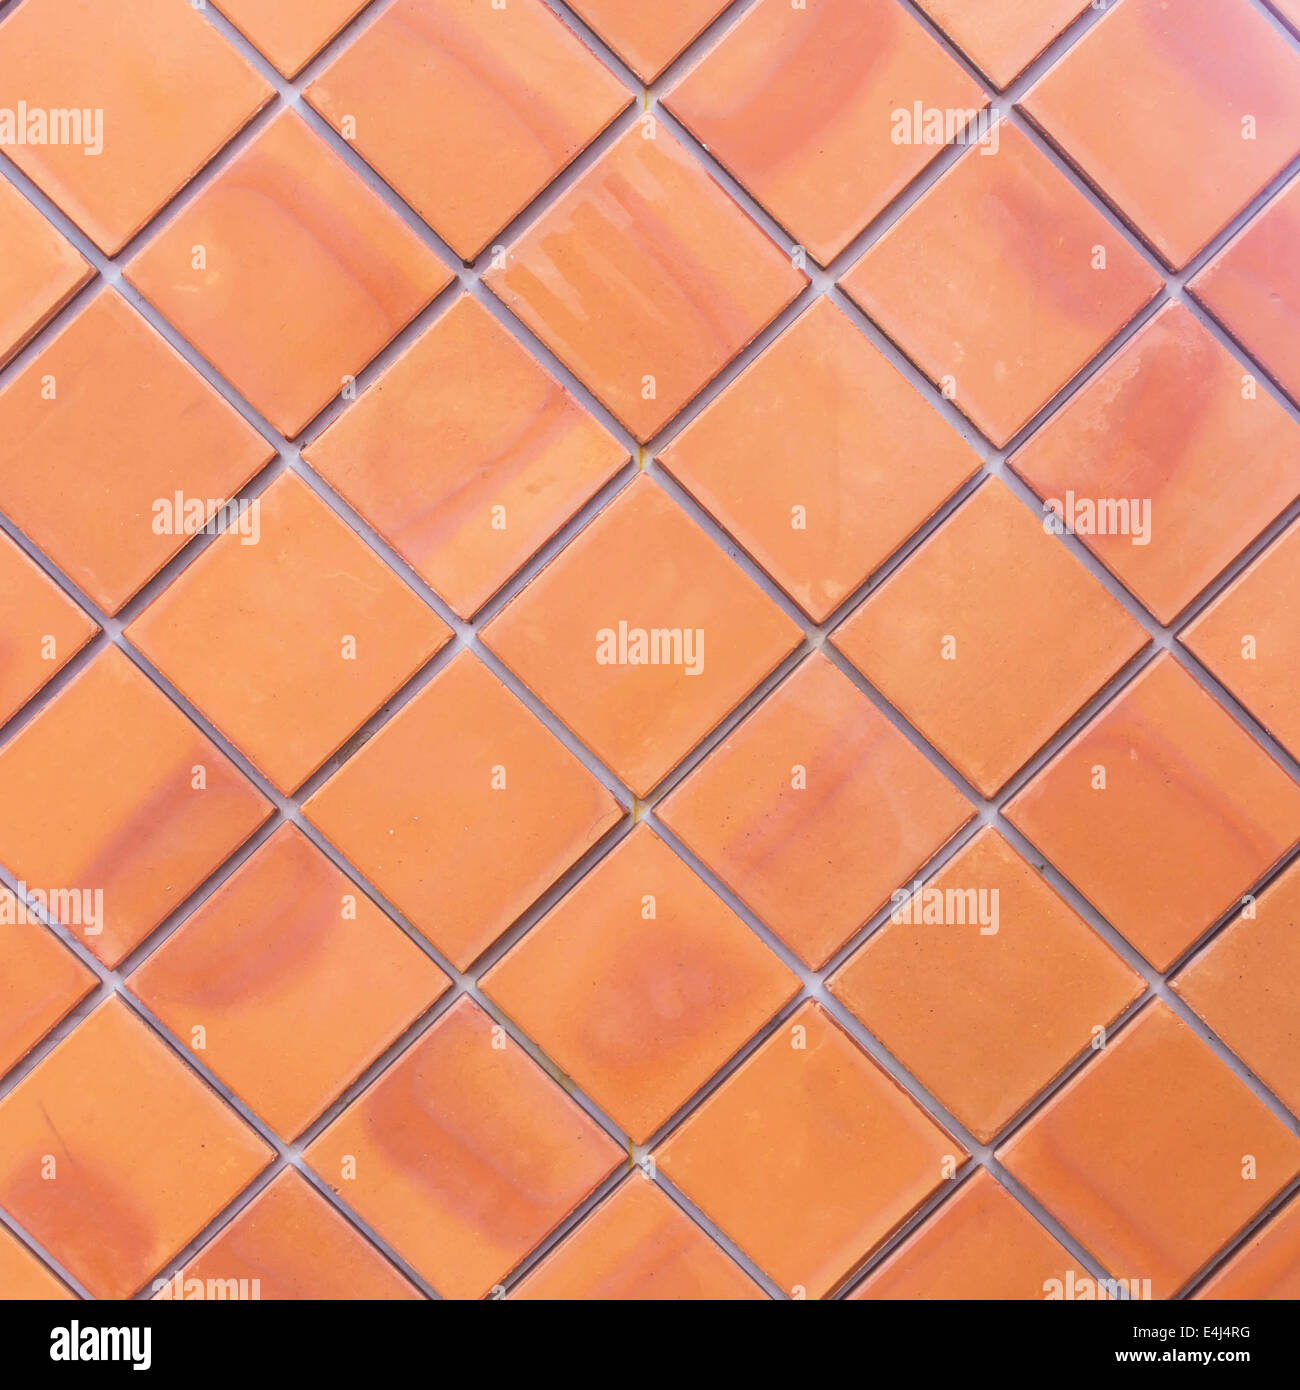 Brown wall tiles as a background or texture. Stock Photo